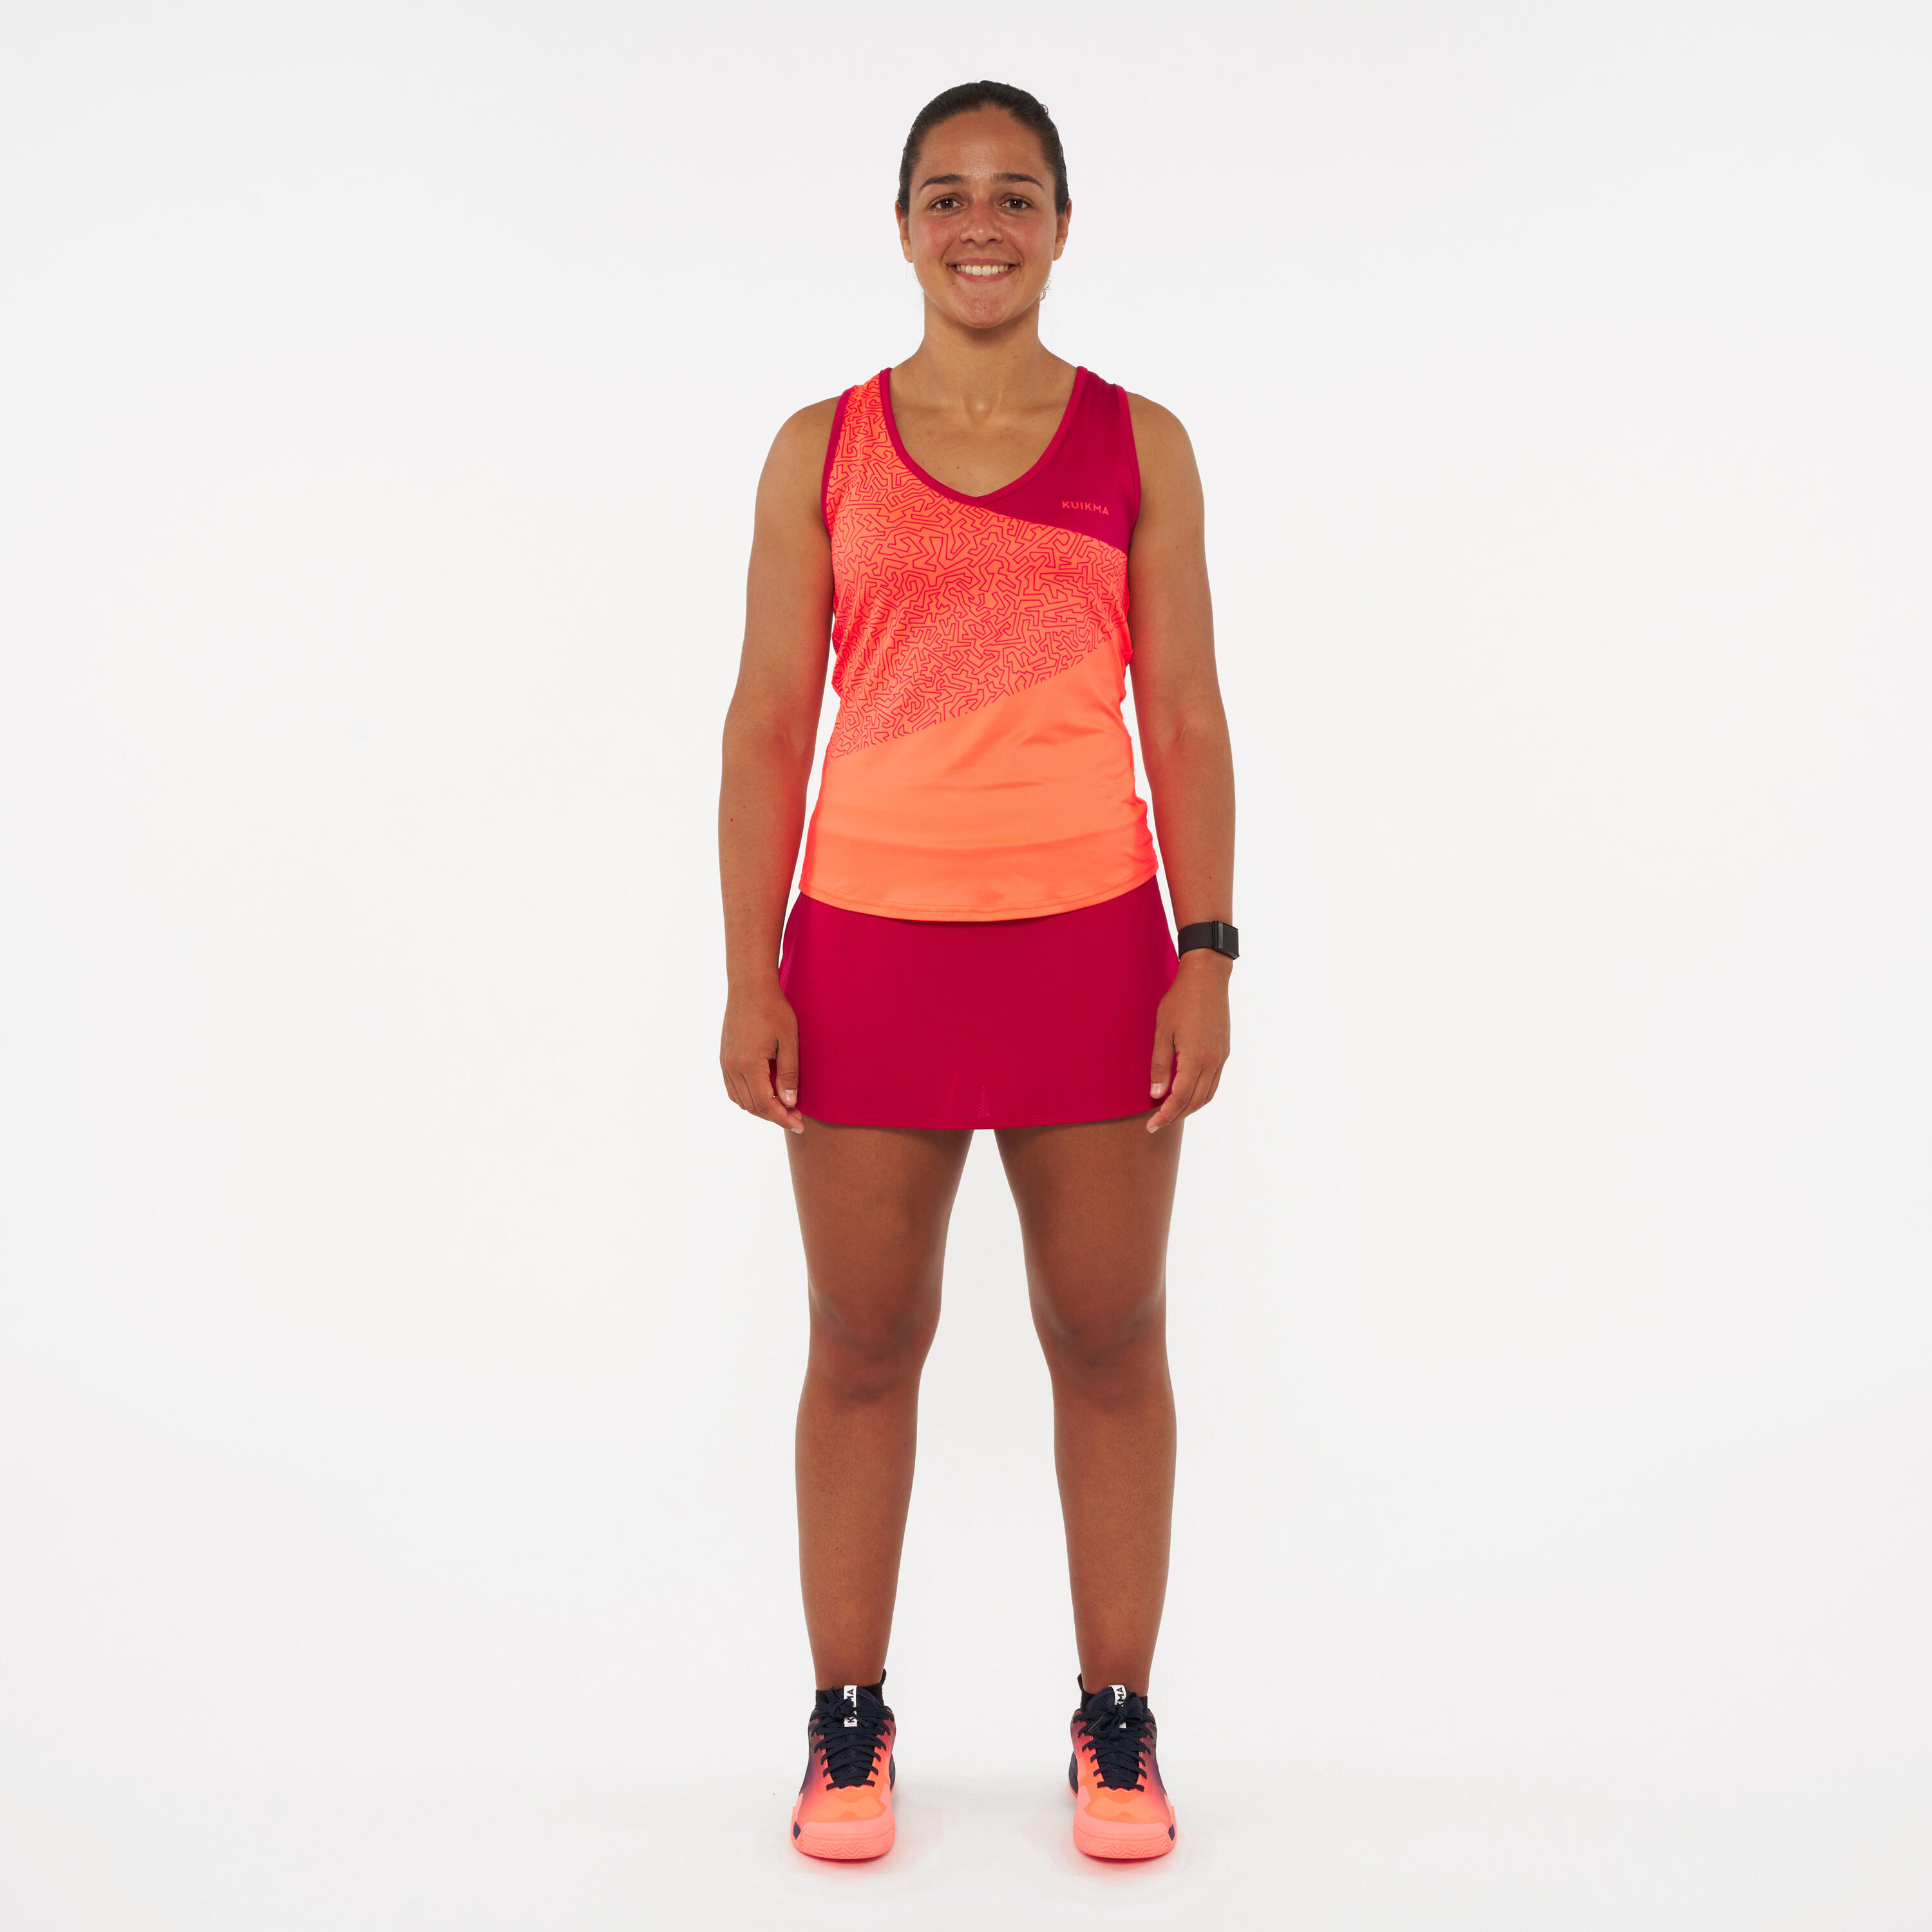 Women's Technical Breathable Padel Tank Top Dry - Red/Orange 2/7